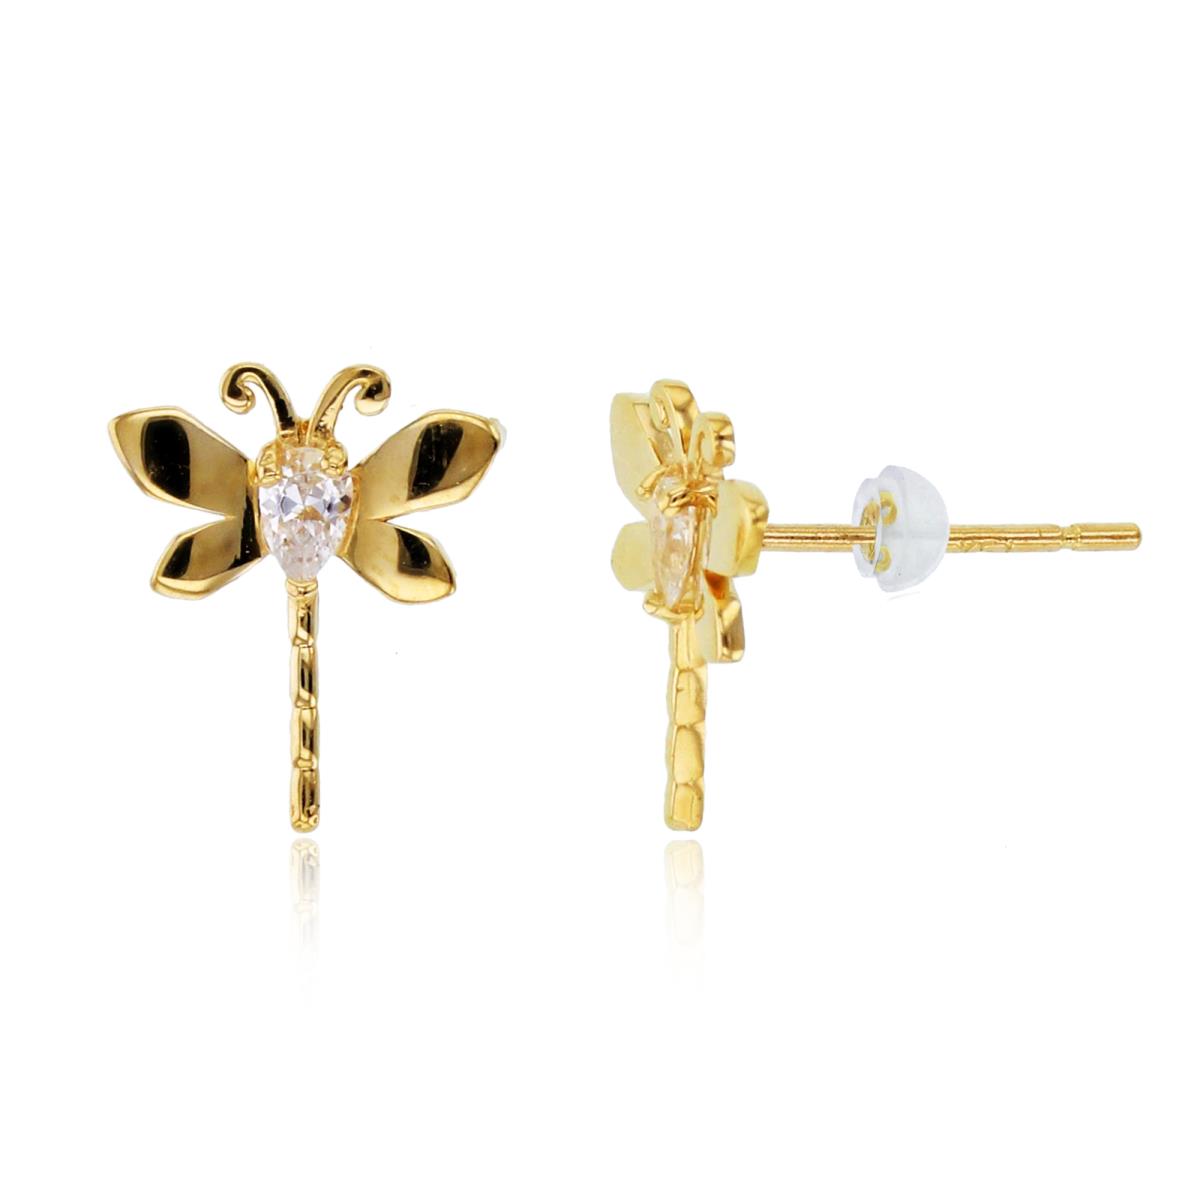 10K Yellow Gold 3x2mm PS CZ High Polished Dragonfly Studs with Silicon Backs